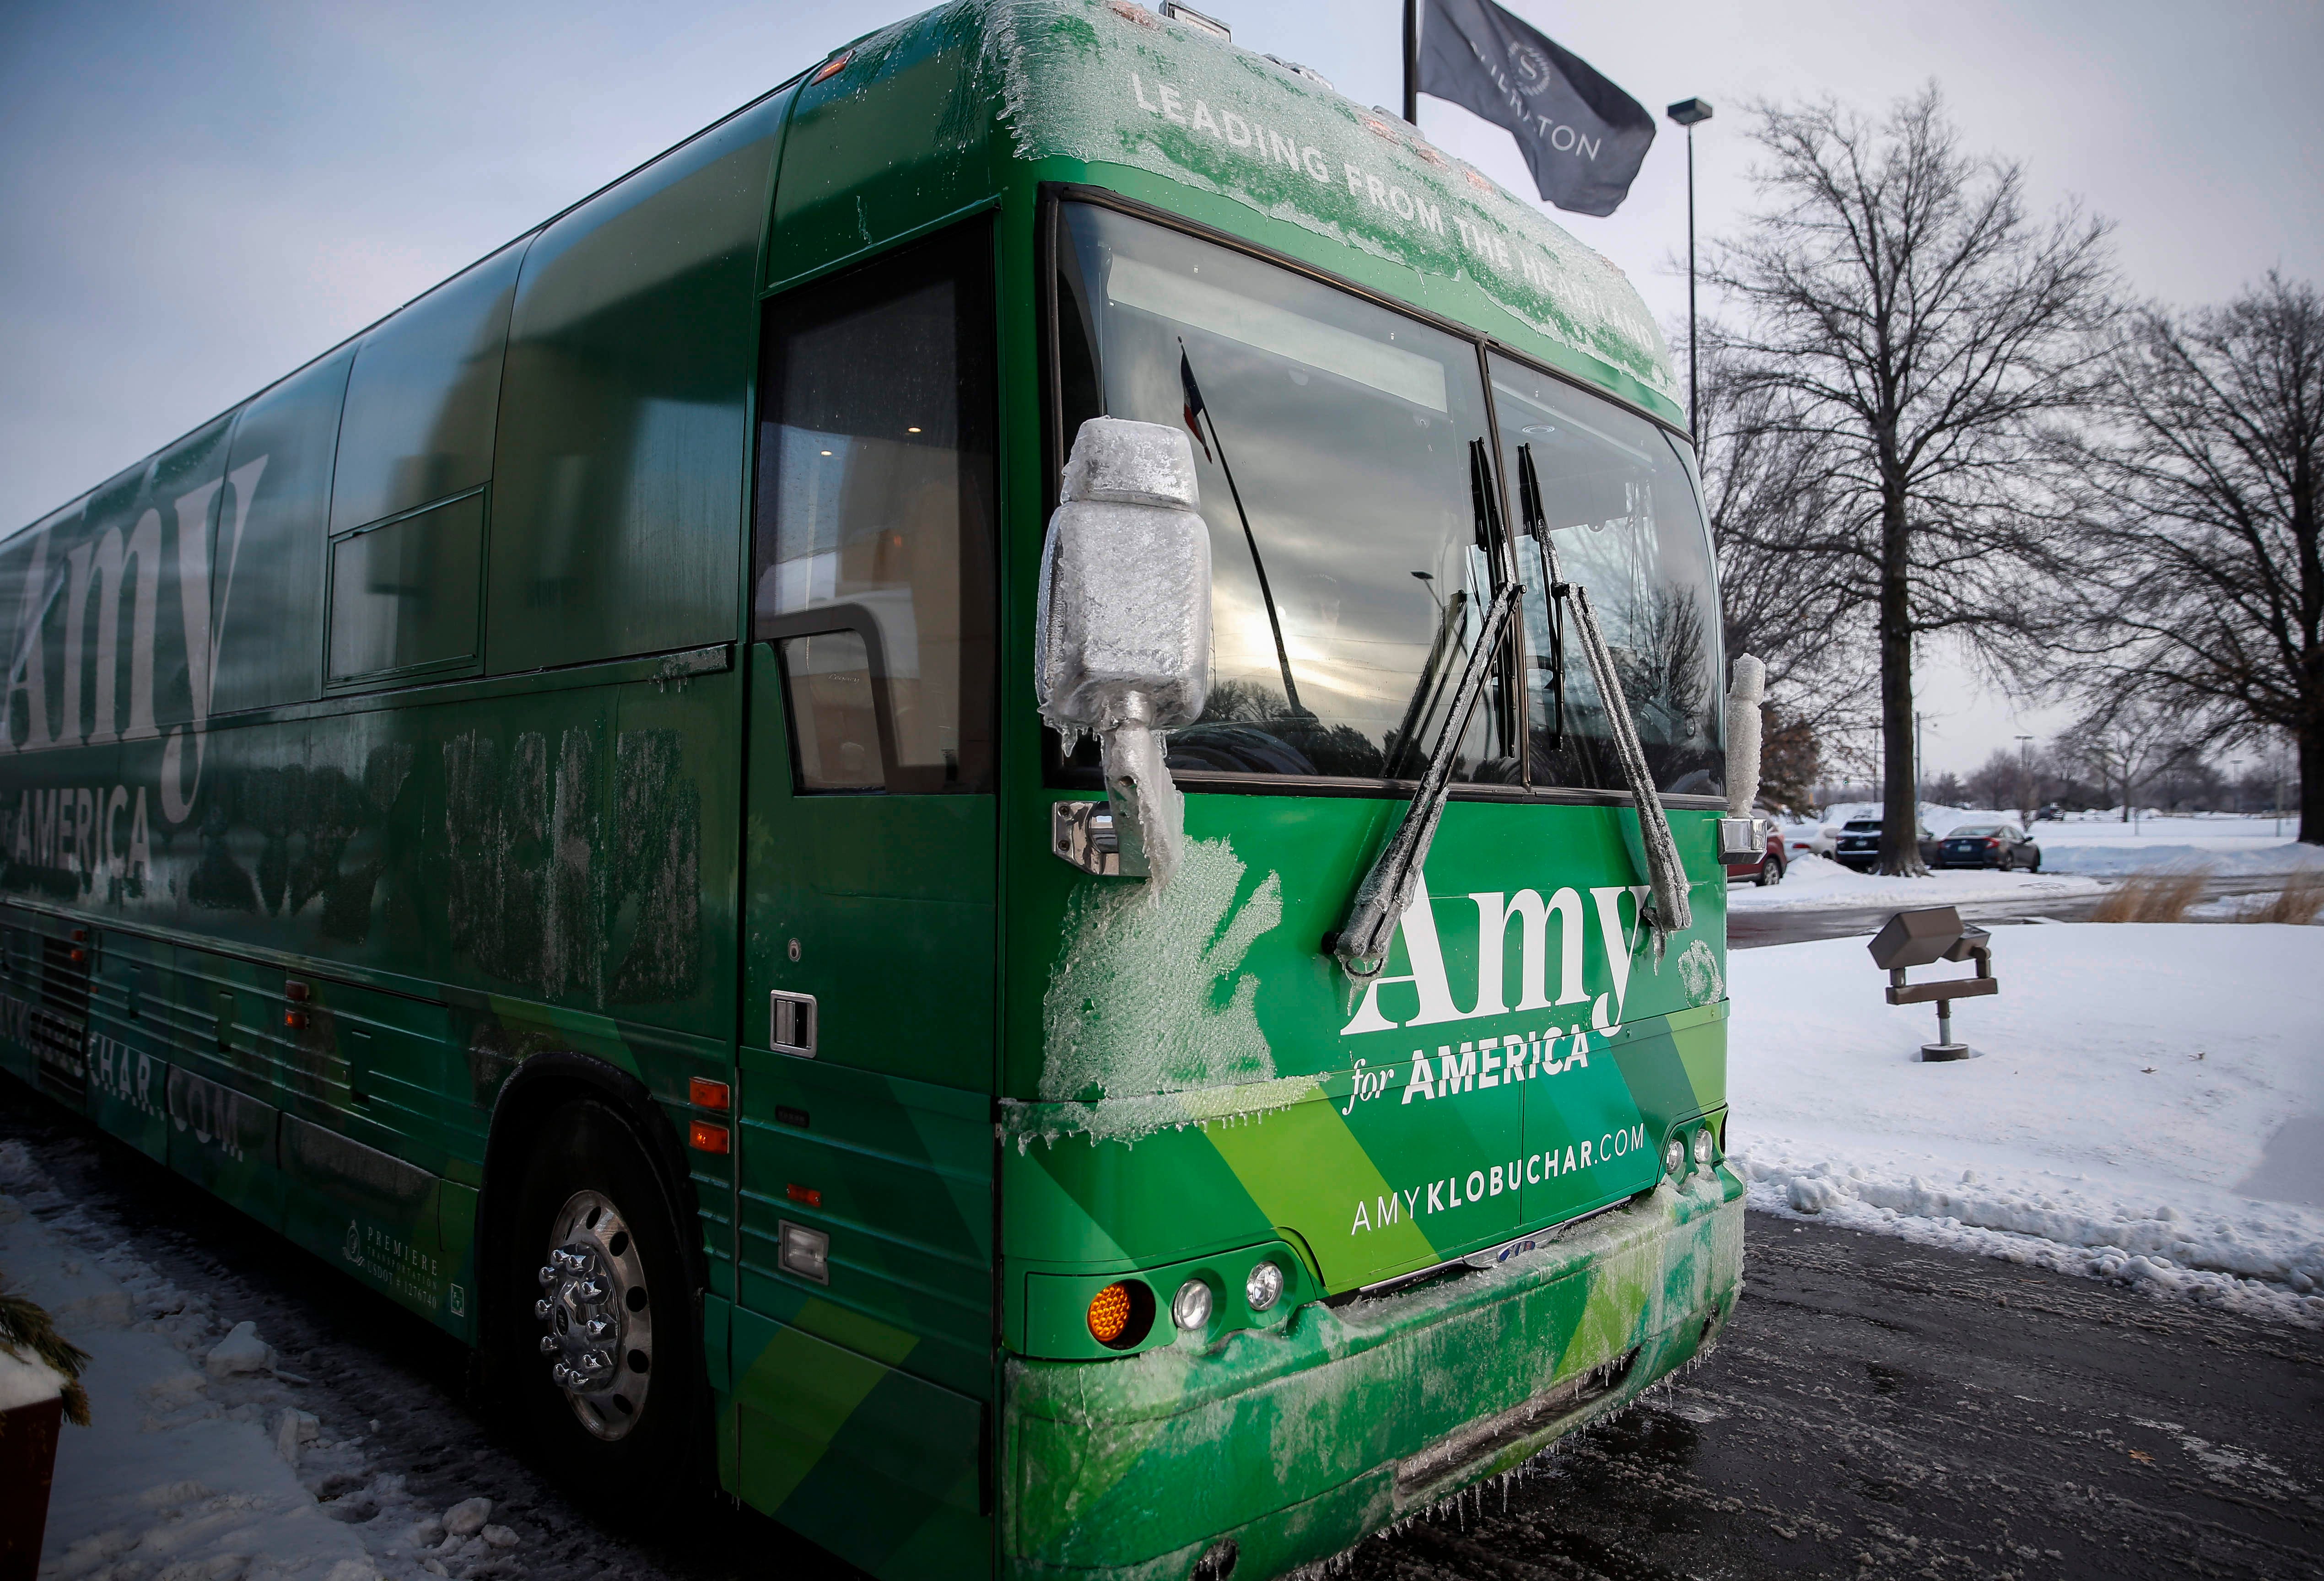 BRYON 8:57 A.M., West Des Moines -- The campaign bus for U.S. Sen. and Democratic presidential candidate hopeful Amy Klobuchar is covered in ice as it idles in the parking lot of the West Des Moines Sheraton hotel. Less than an hour later, the bus broke down due to the bitterly cold weather.